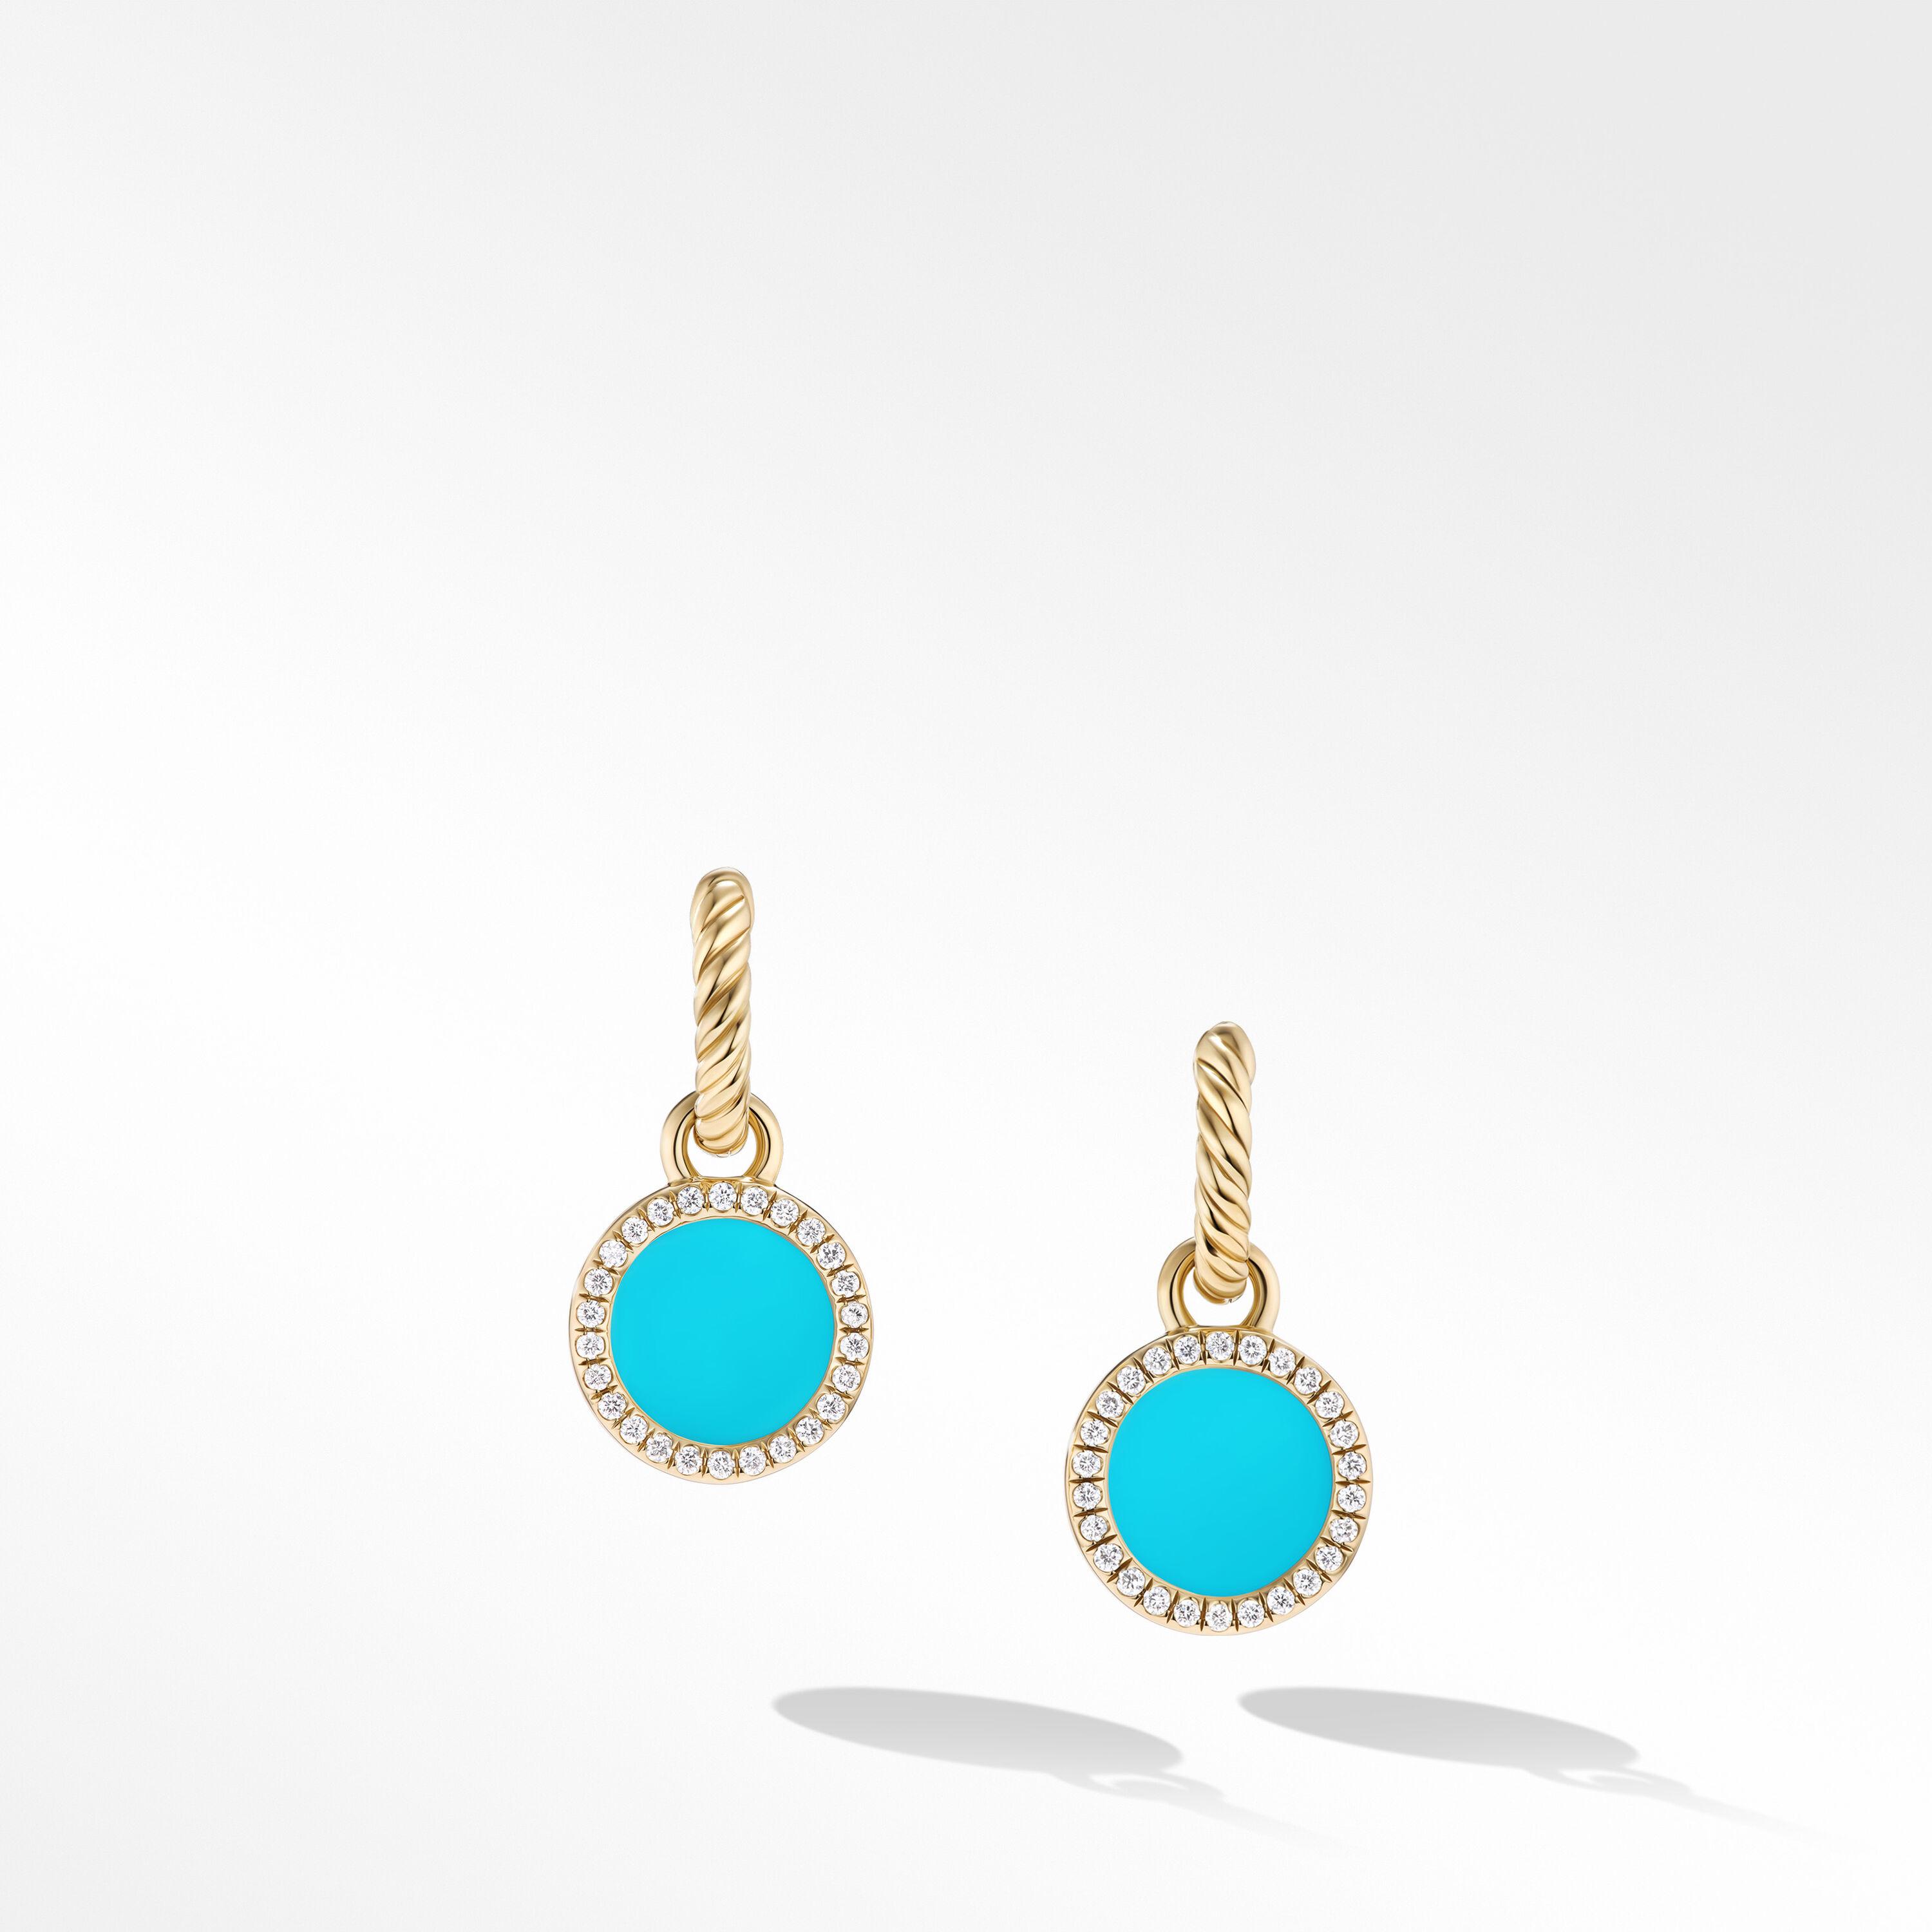 David Yurman Petite DY Elements Drop Earrings with Turquoise and Pave Diamonds